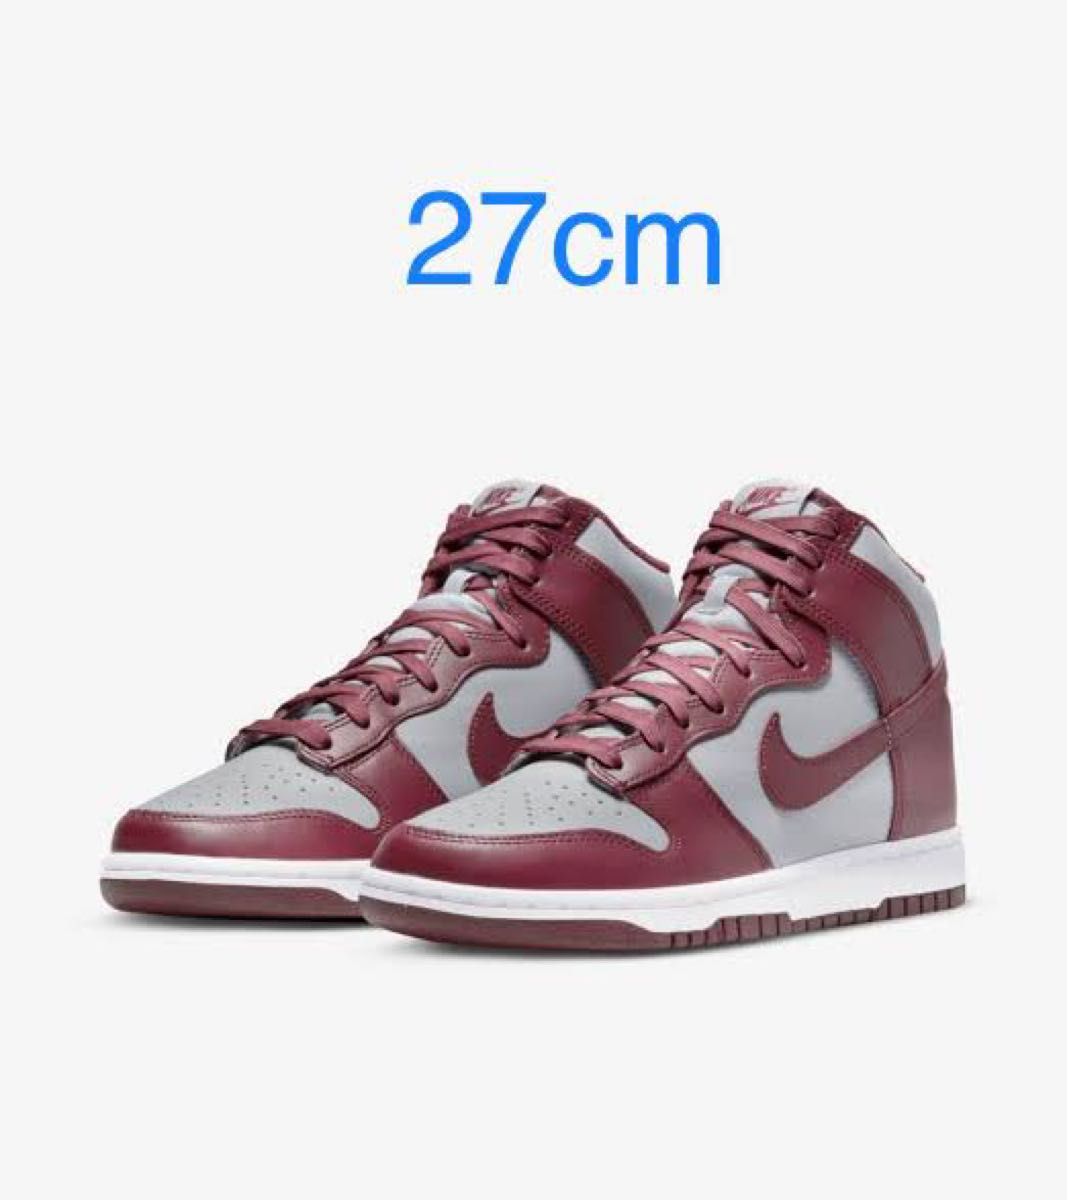 Nike Dunk HighDark Beetroot and WolfGrey｜PayPayフリマ